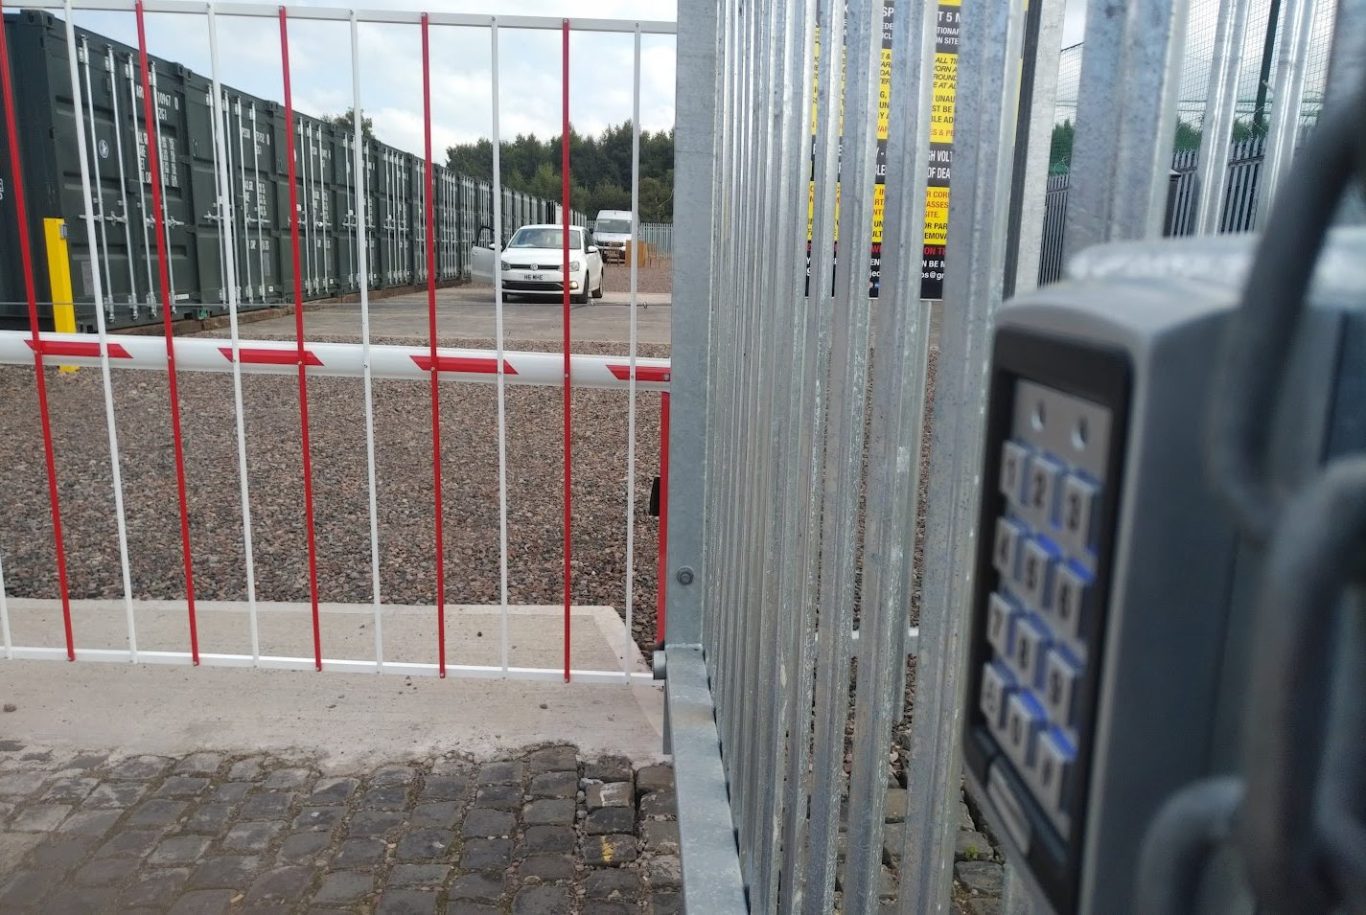 digital keypad entry to a security site